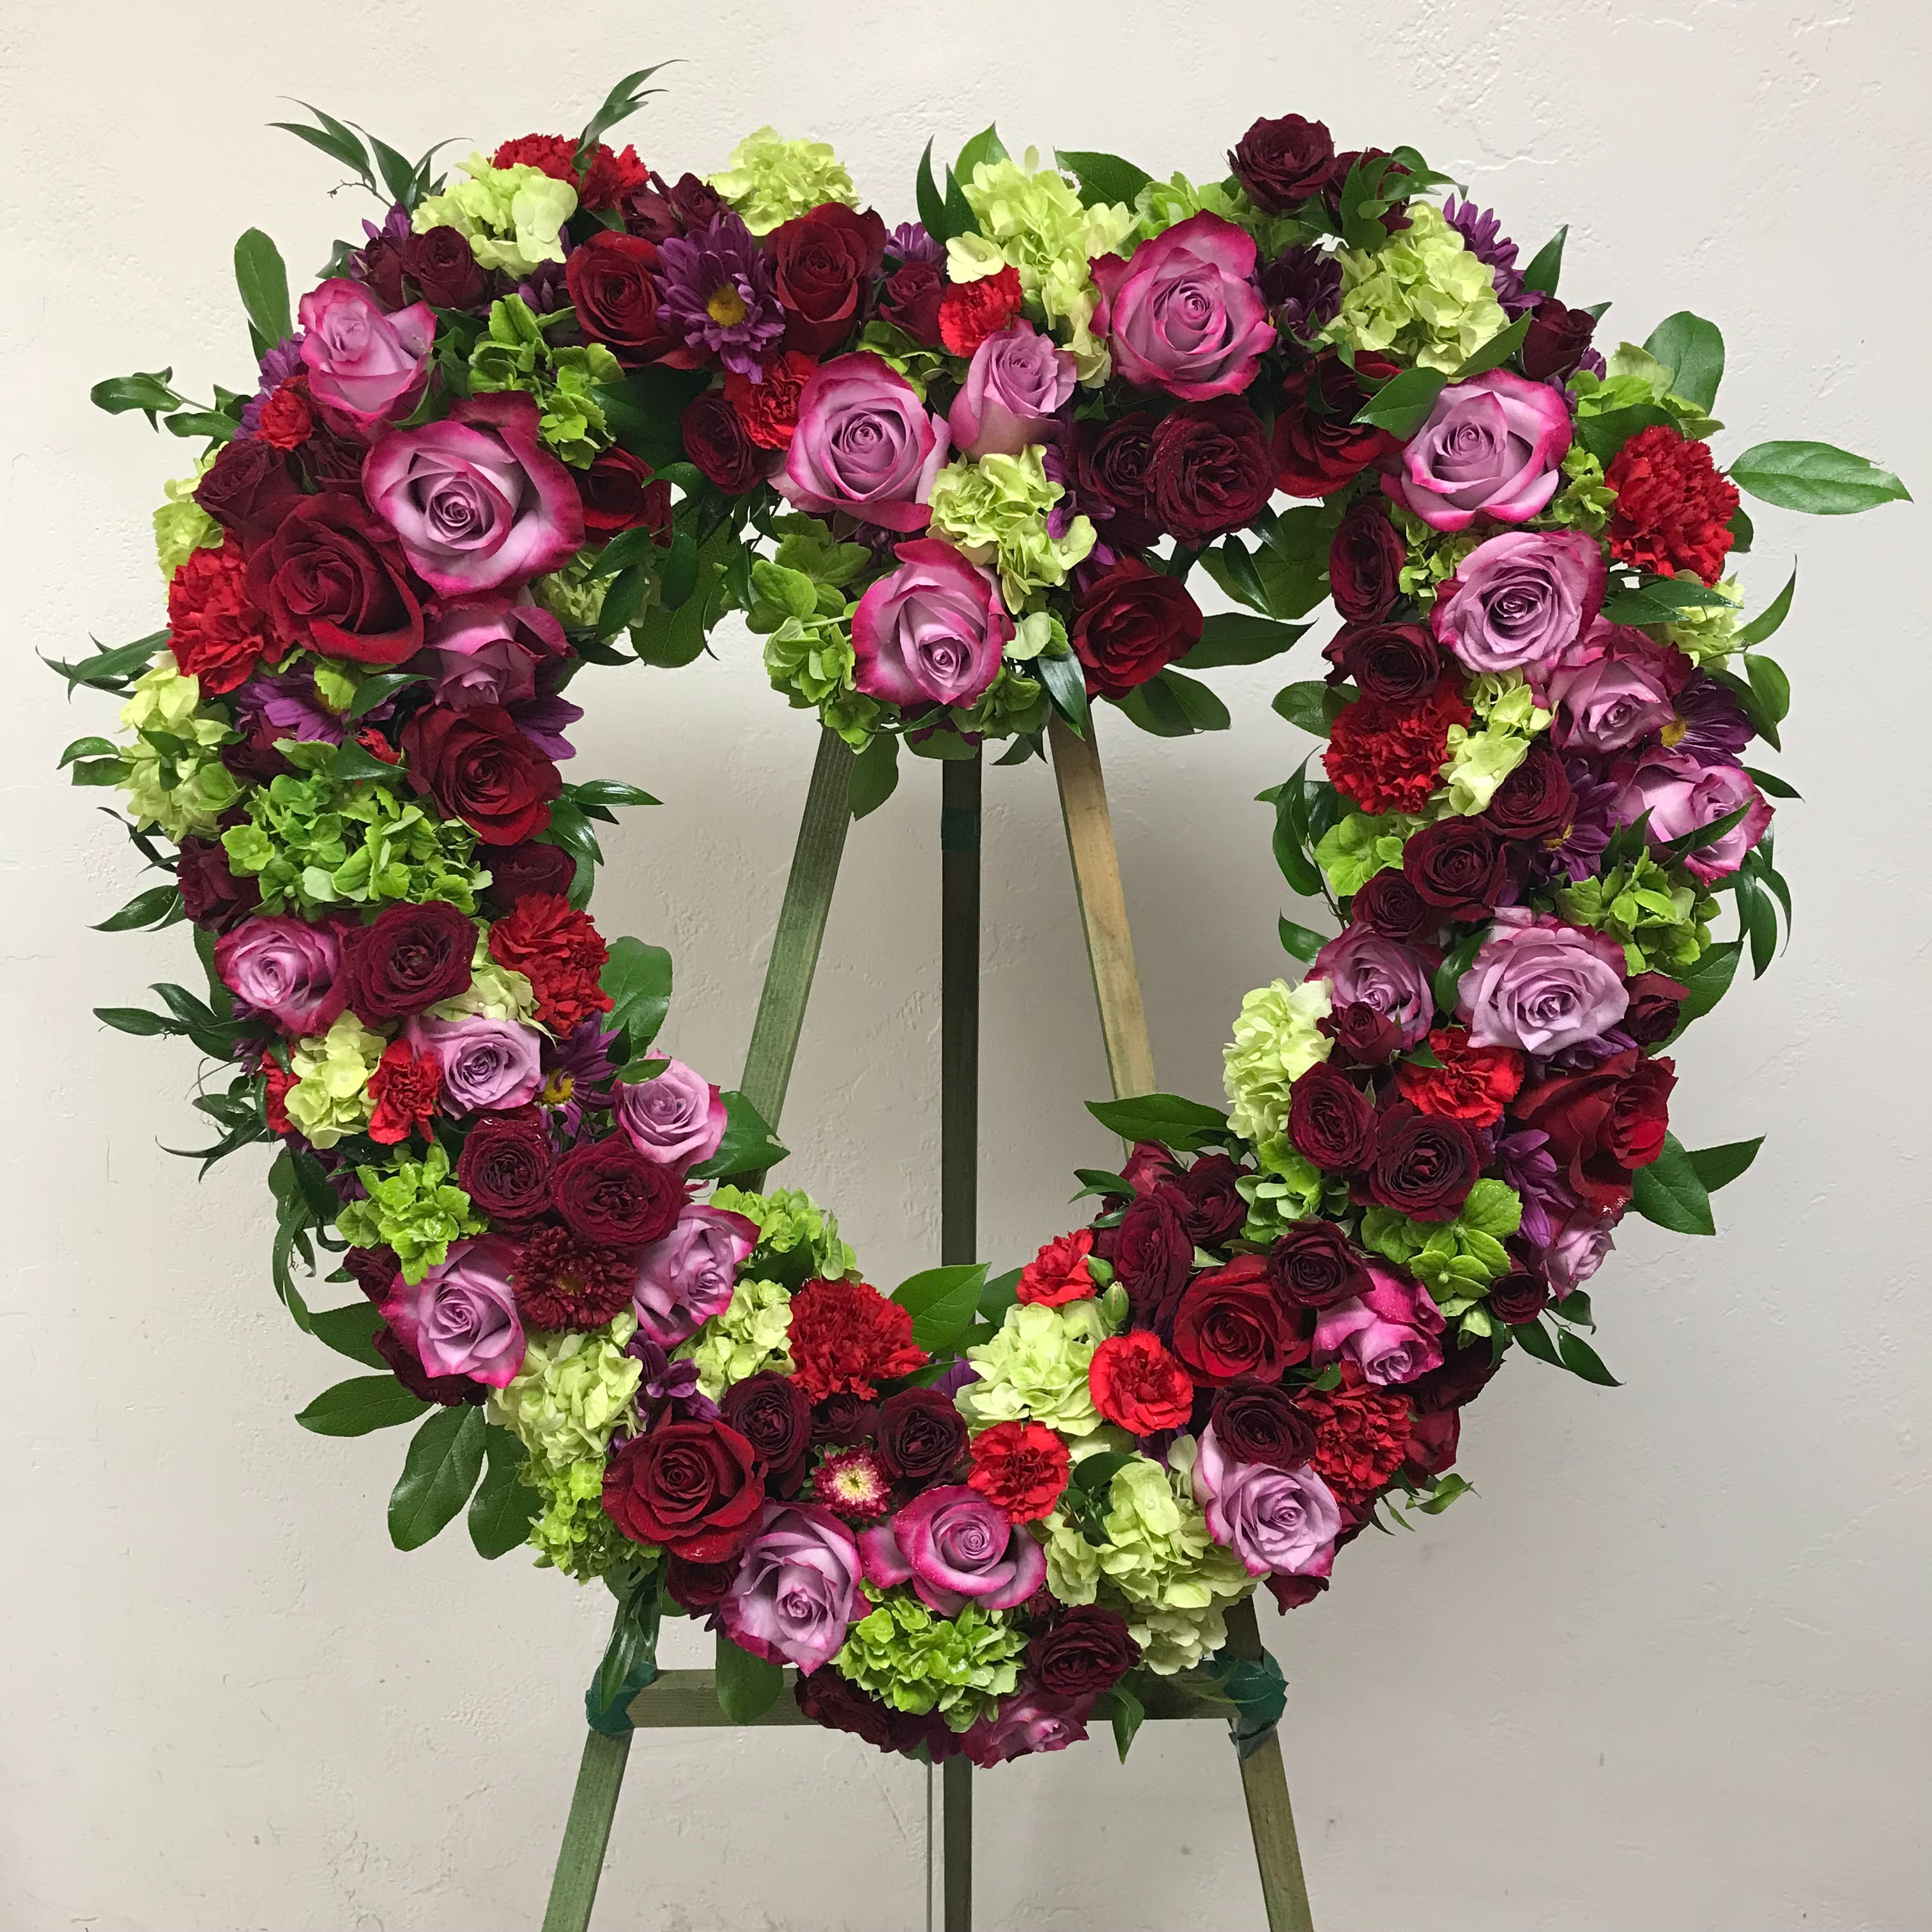 Infinite Love - Reminiscent of the rich jewel tones of an exquisite stained glass window, this lovely floral testament to the circle of life and love evokes beautiful memories even during the most difficult times. A standing wreath of stunning flowers such as lavender roses, red roses, burgundy spray roses, red carnations, green hydrangea, dark pink Sweet William, lavender chrysanthemums and fresh greens. 